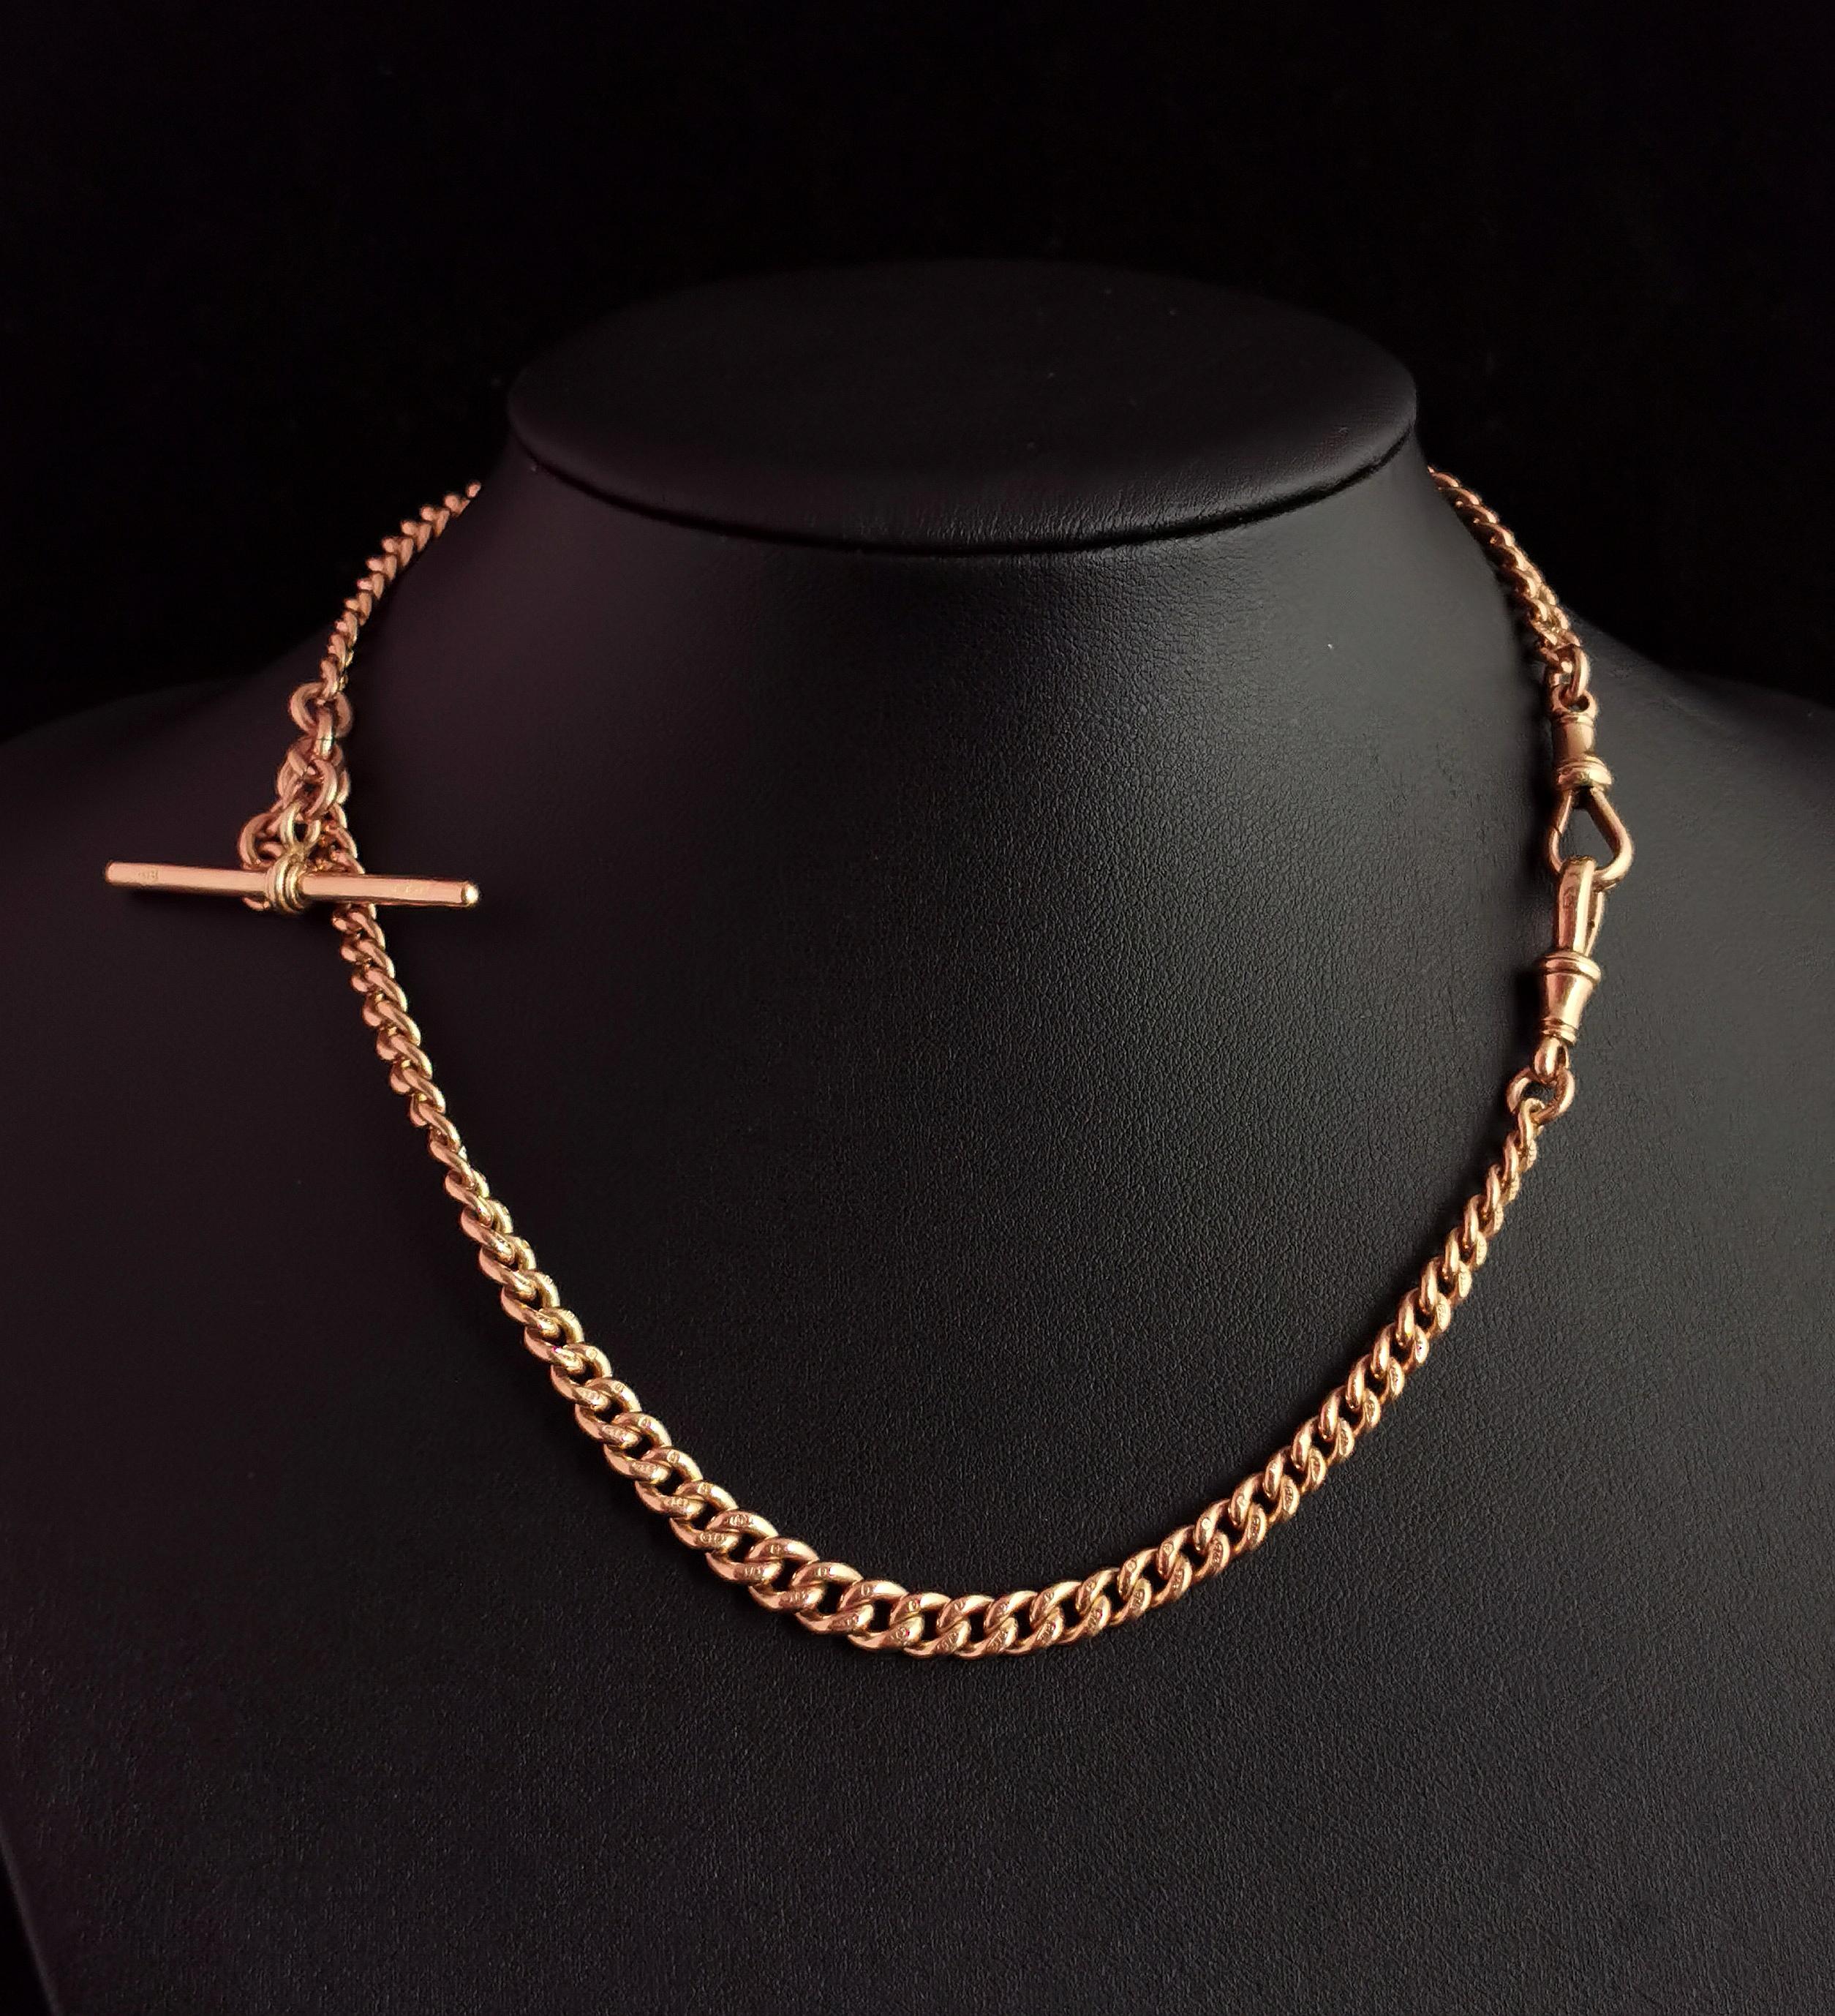 Edwardian Antique 9k Rose Gold Albert Chain, Watch Chain Necklace, Curb Link